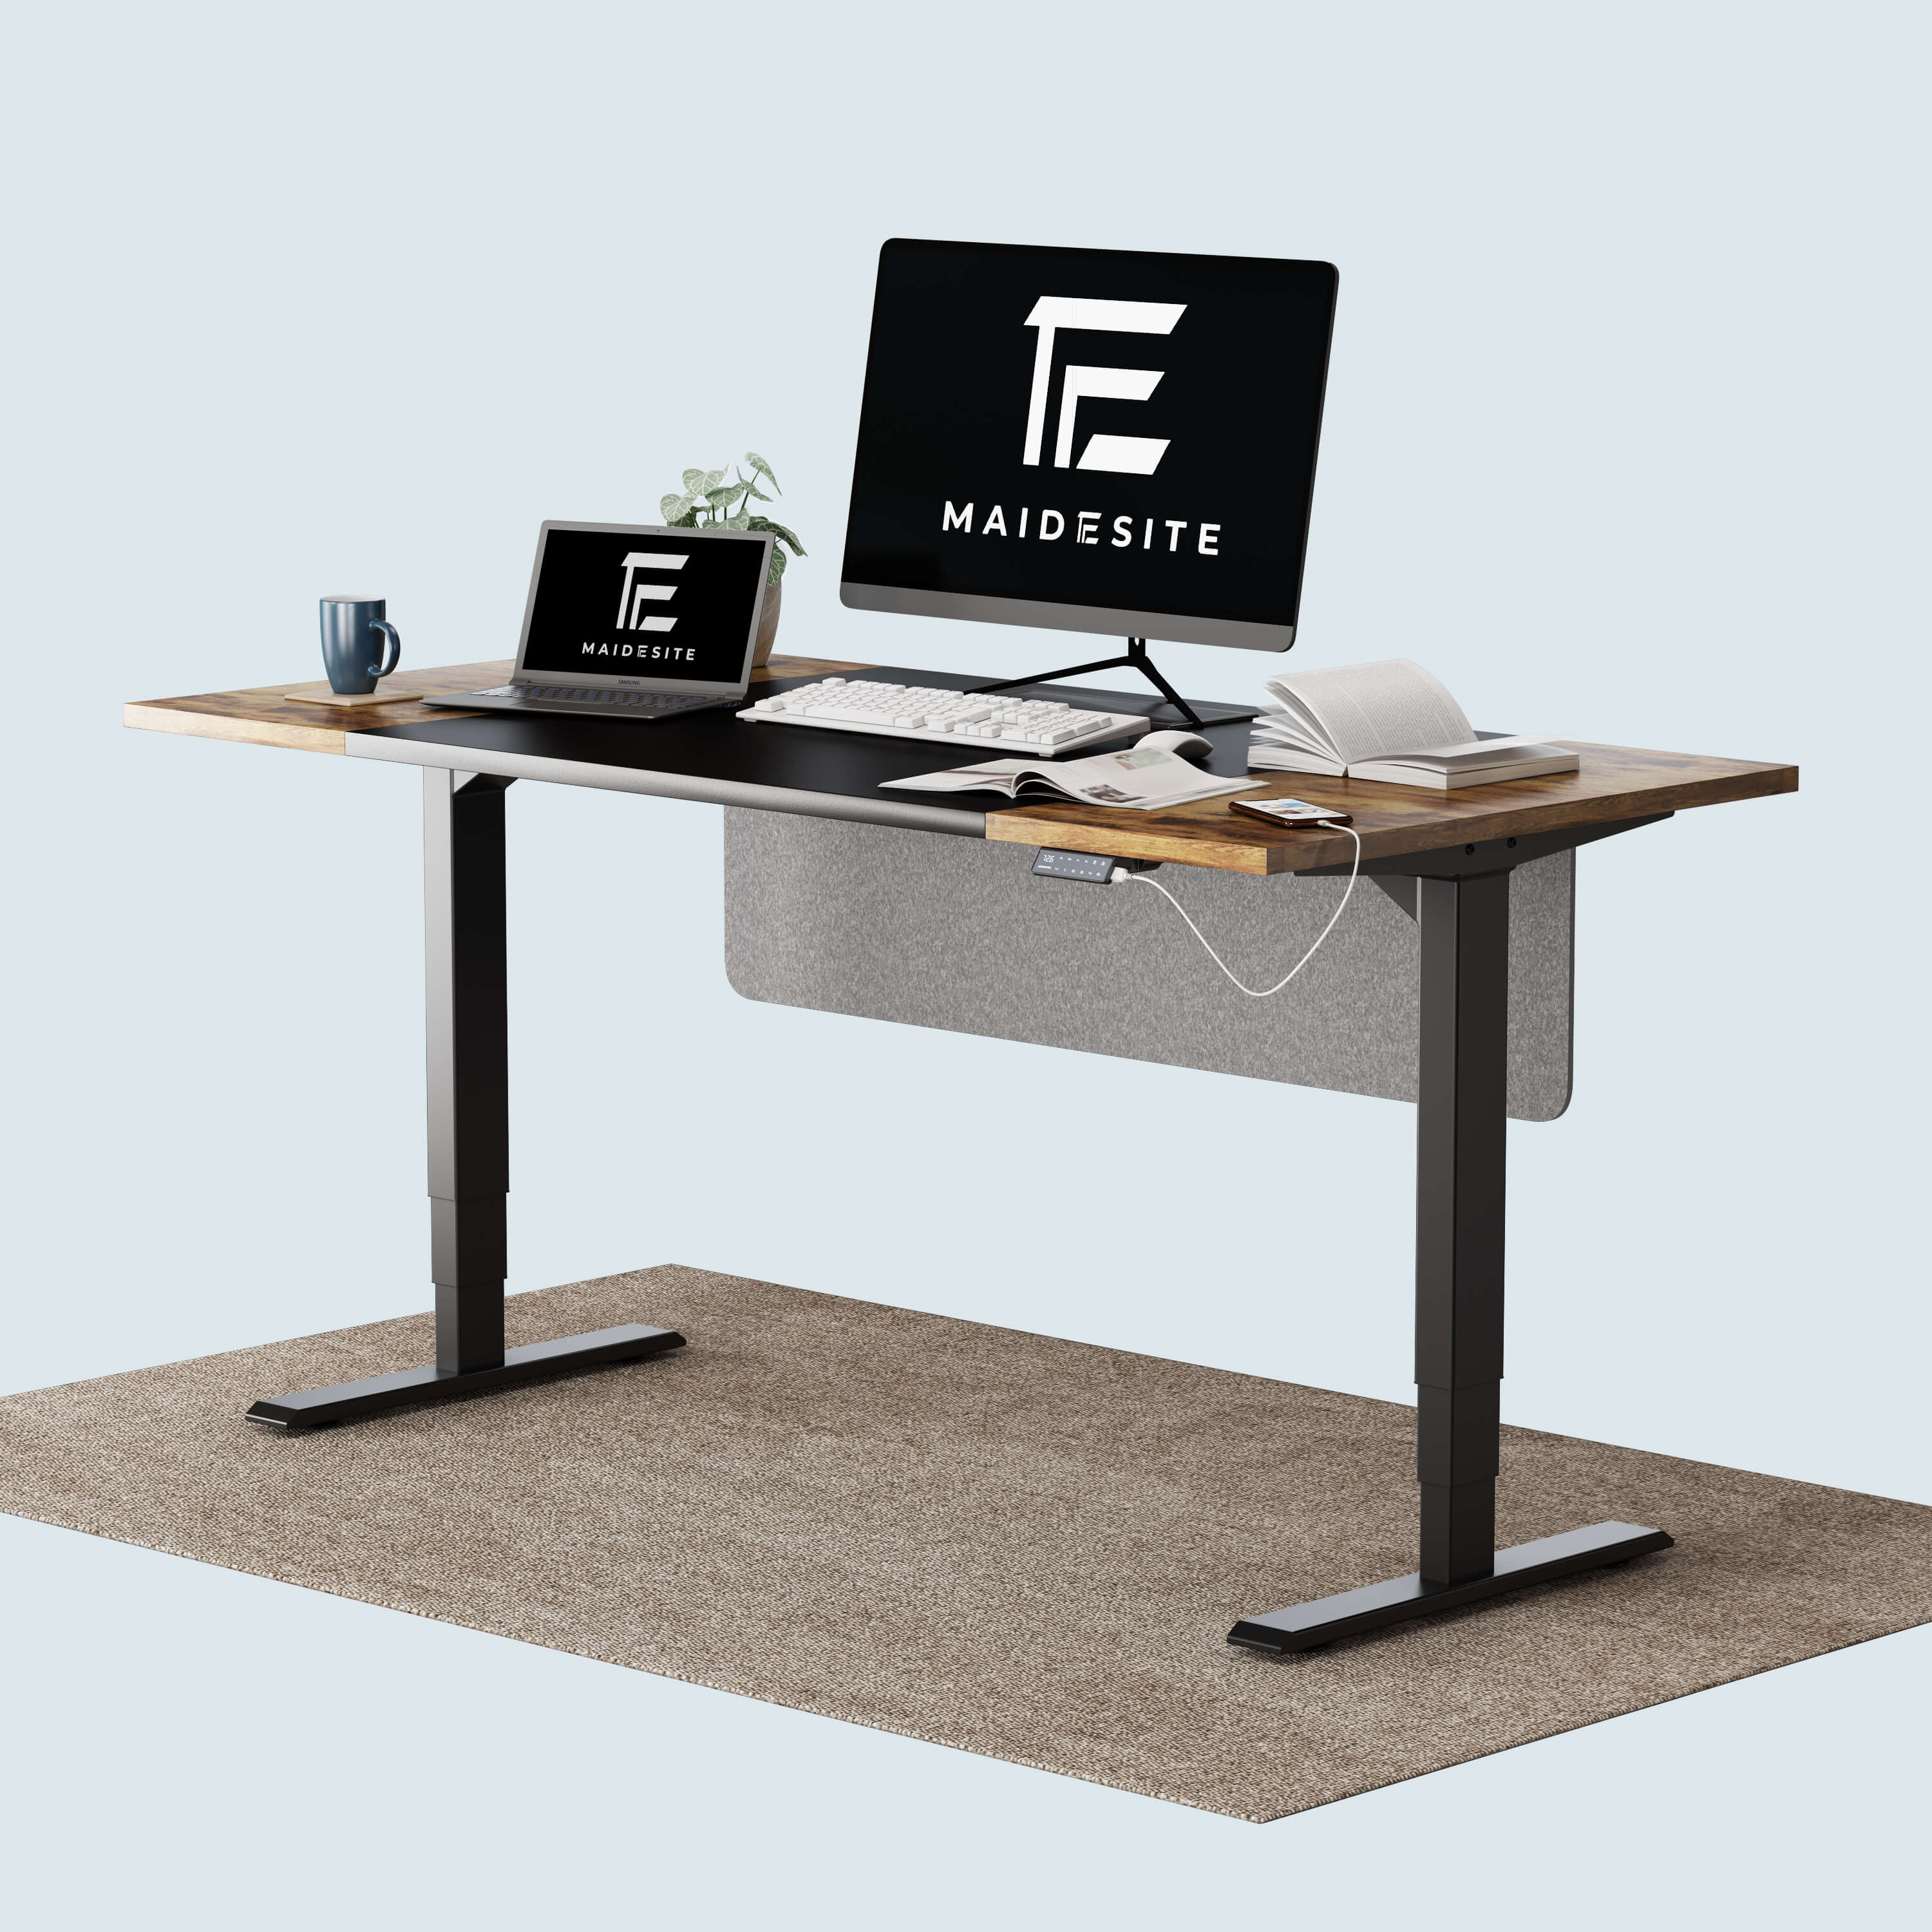 Maidesite 180cm standing desk for back pain people standing at working